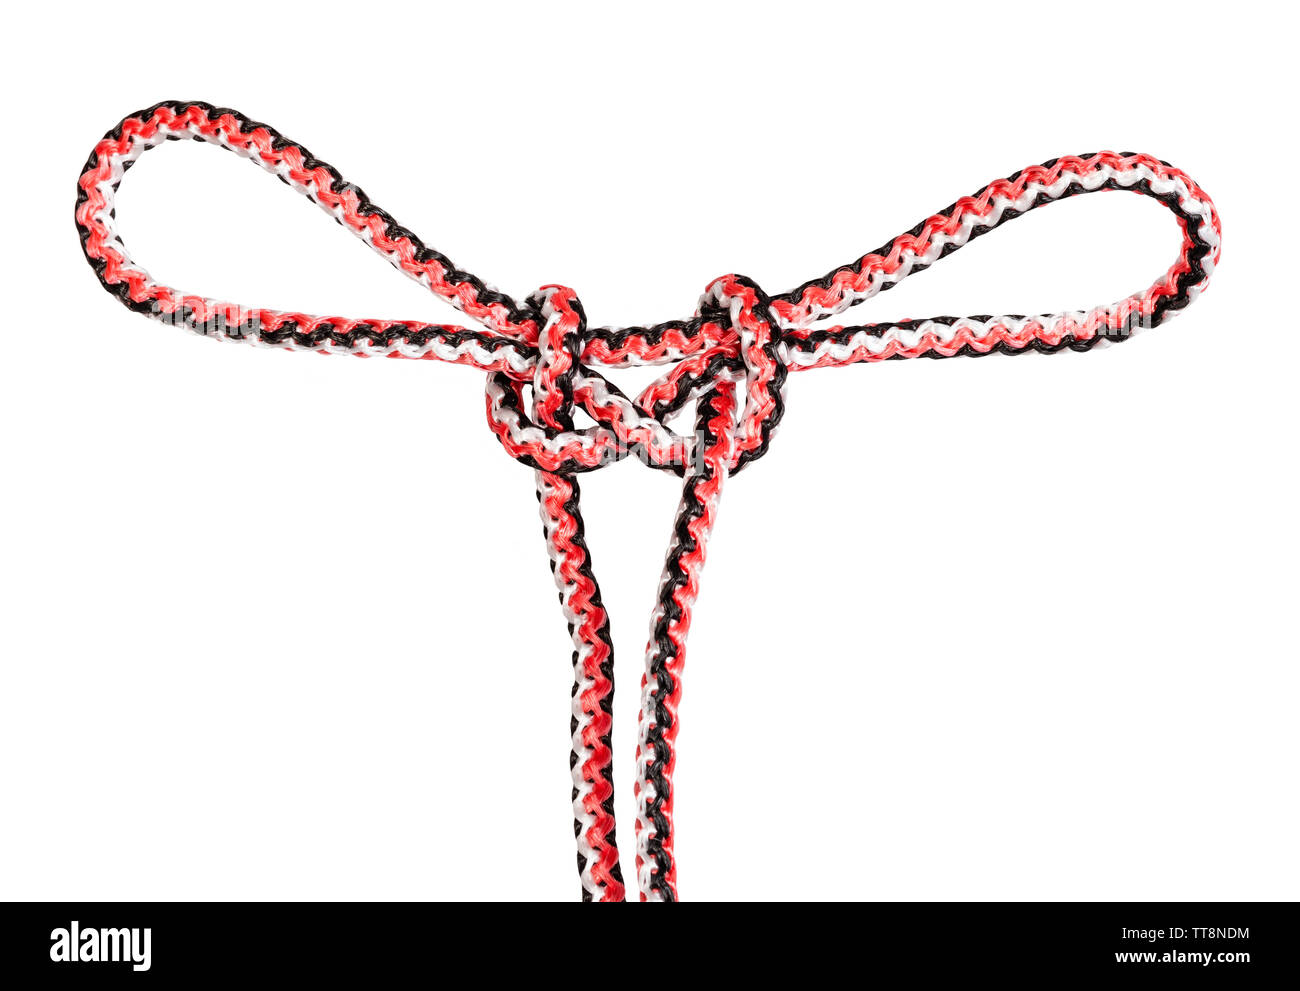 sheepshank knot tied on synthetic rope cut out on white background ...